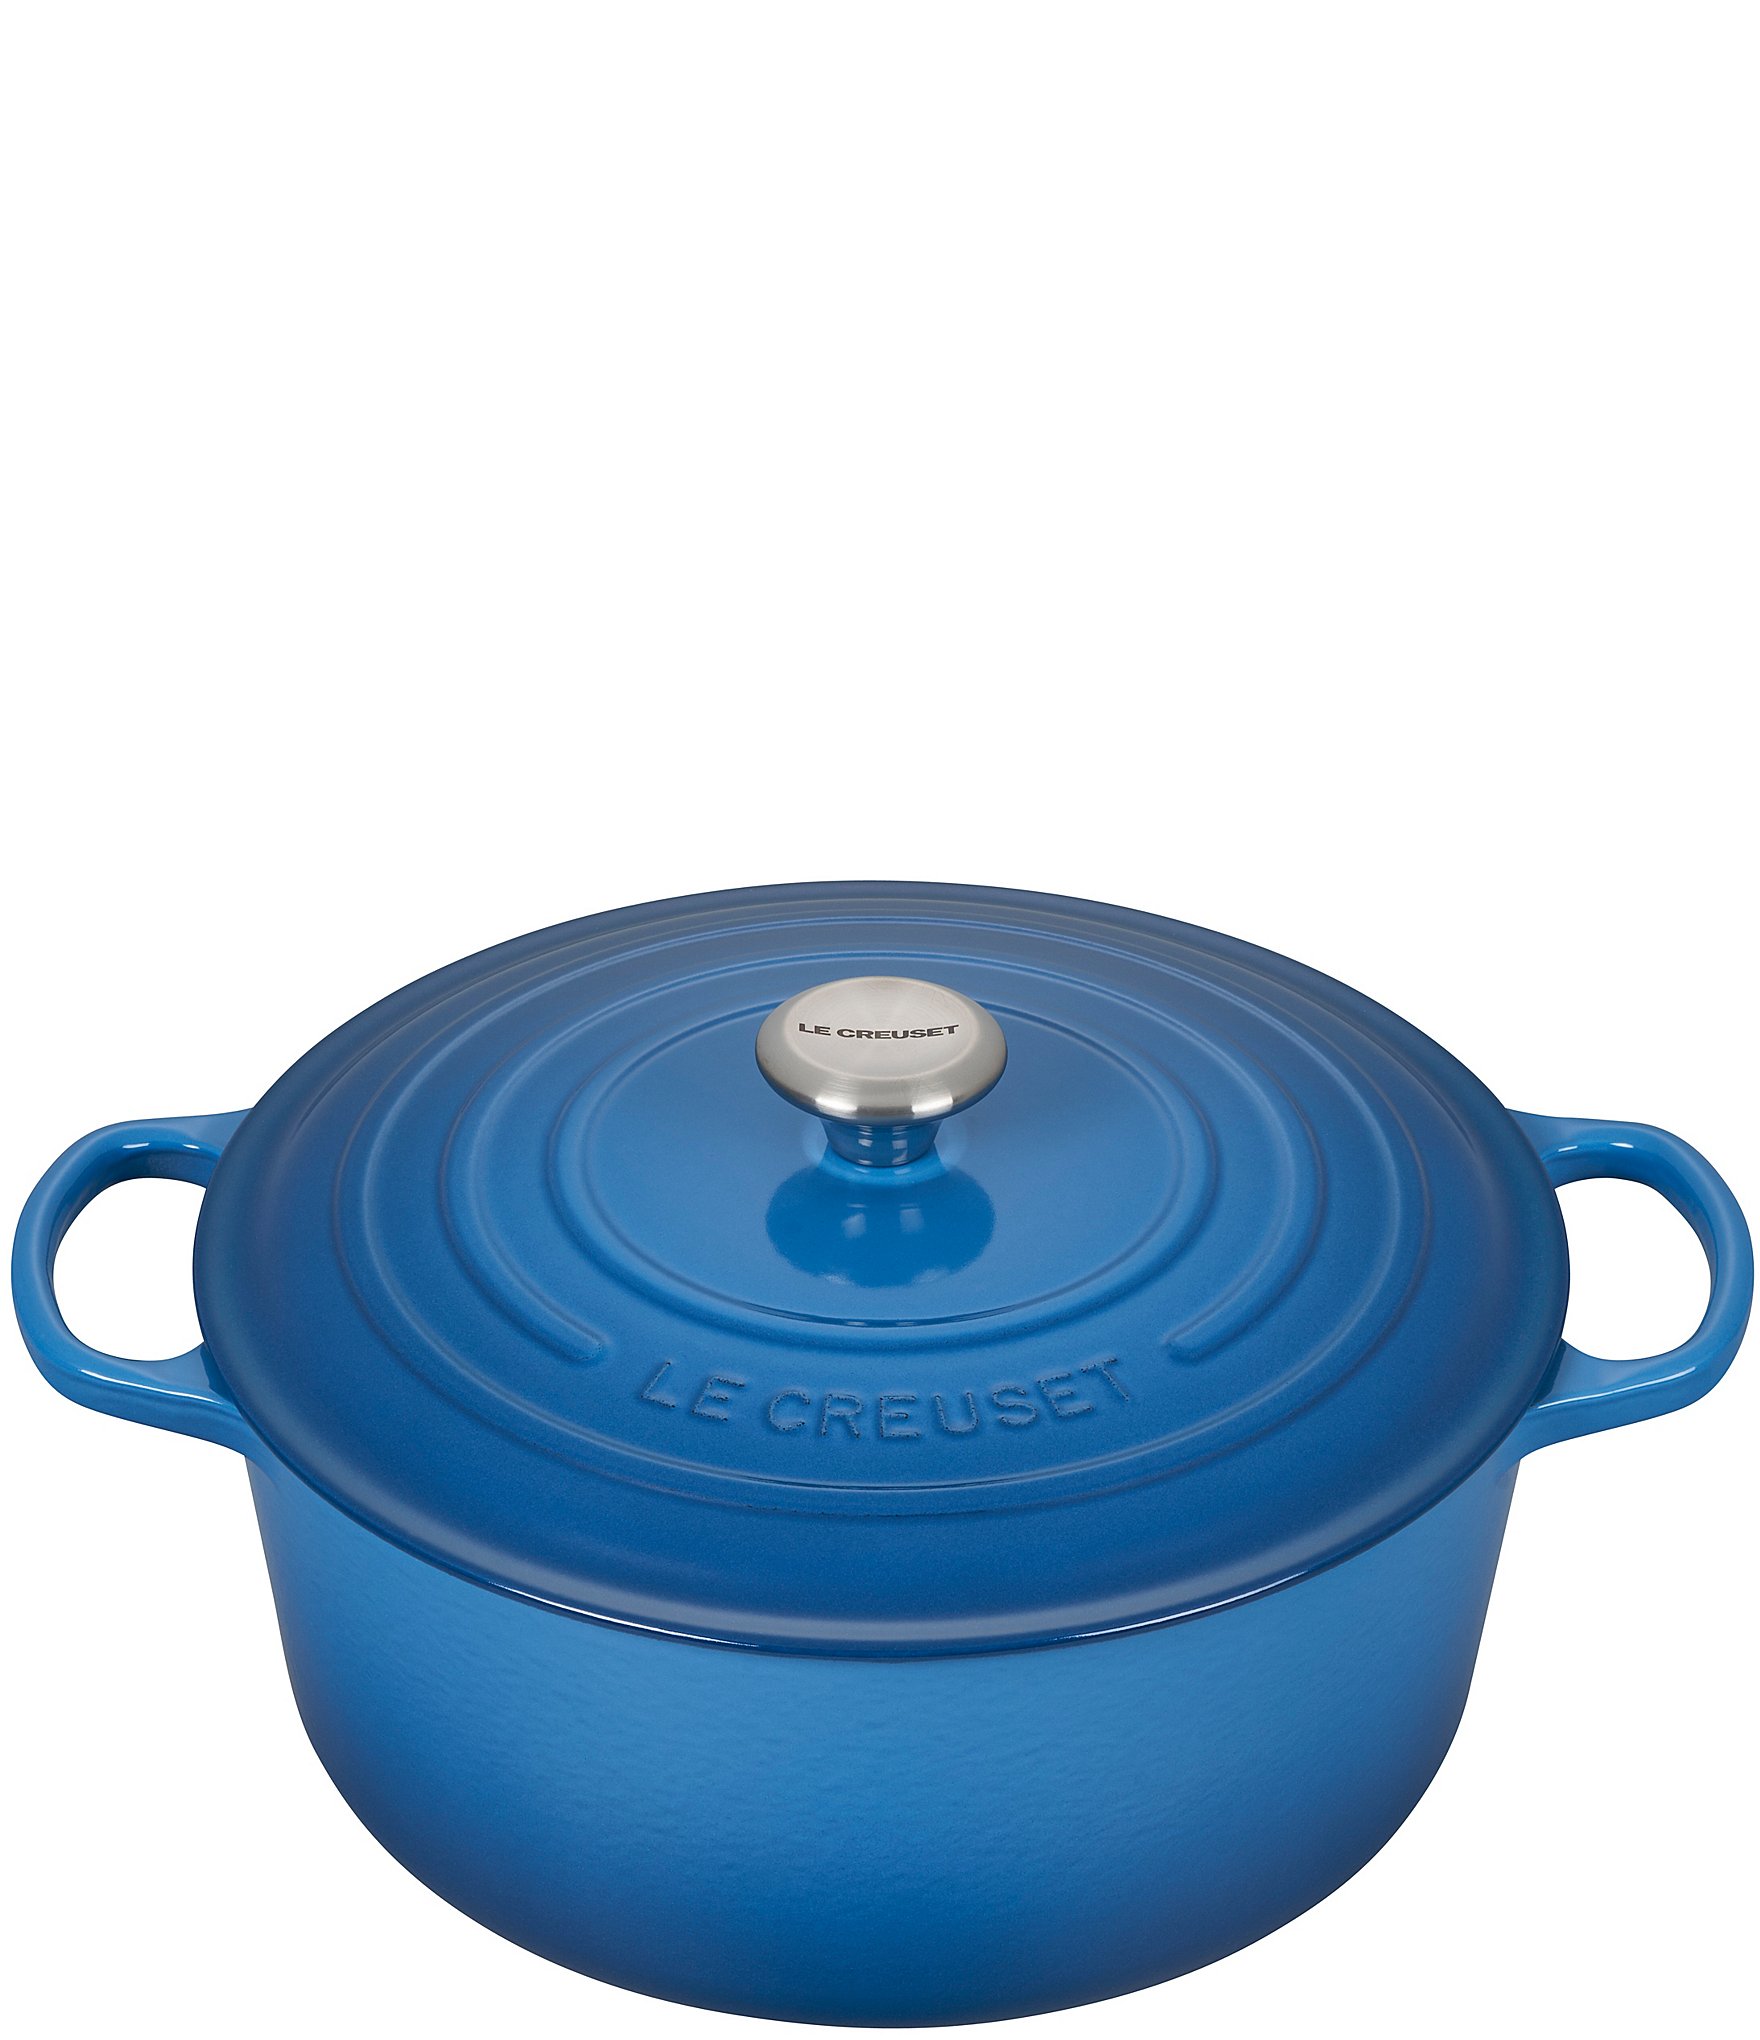 3.5 Qt. Round Signature Dutch Oven with Stainless Steel Knob (Sea Salt), Le Creuset